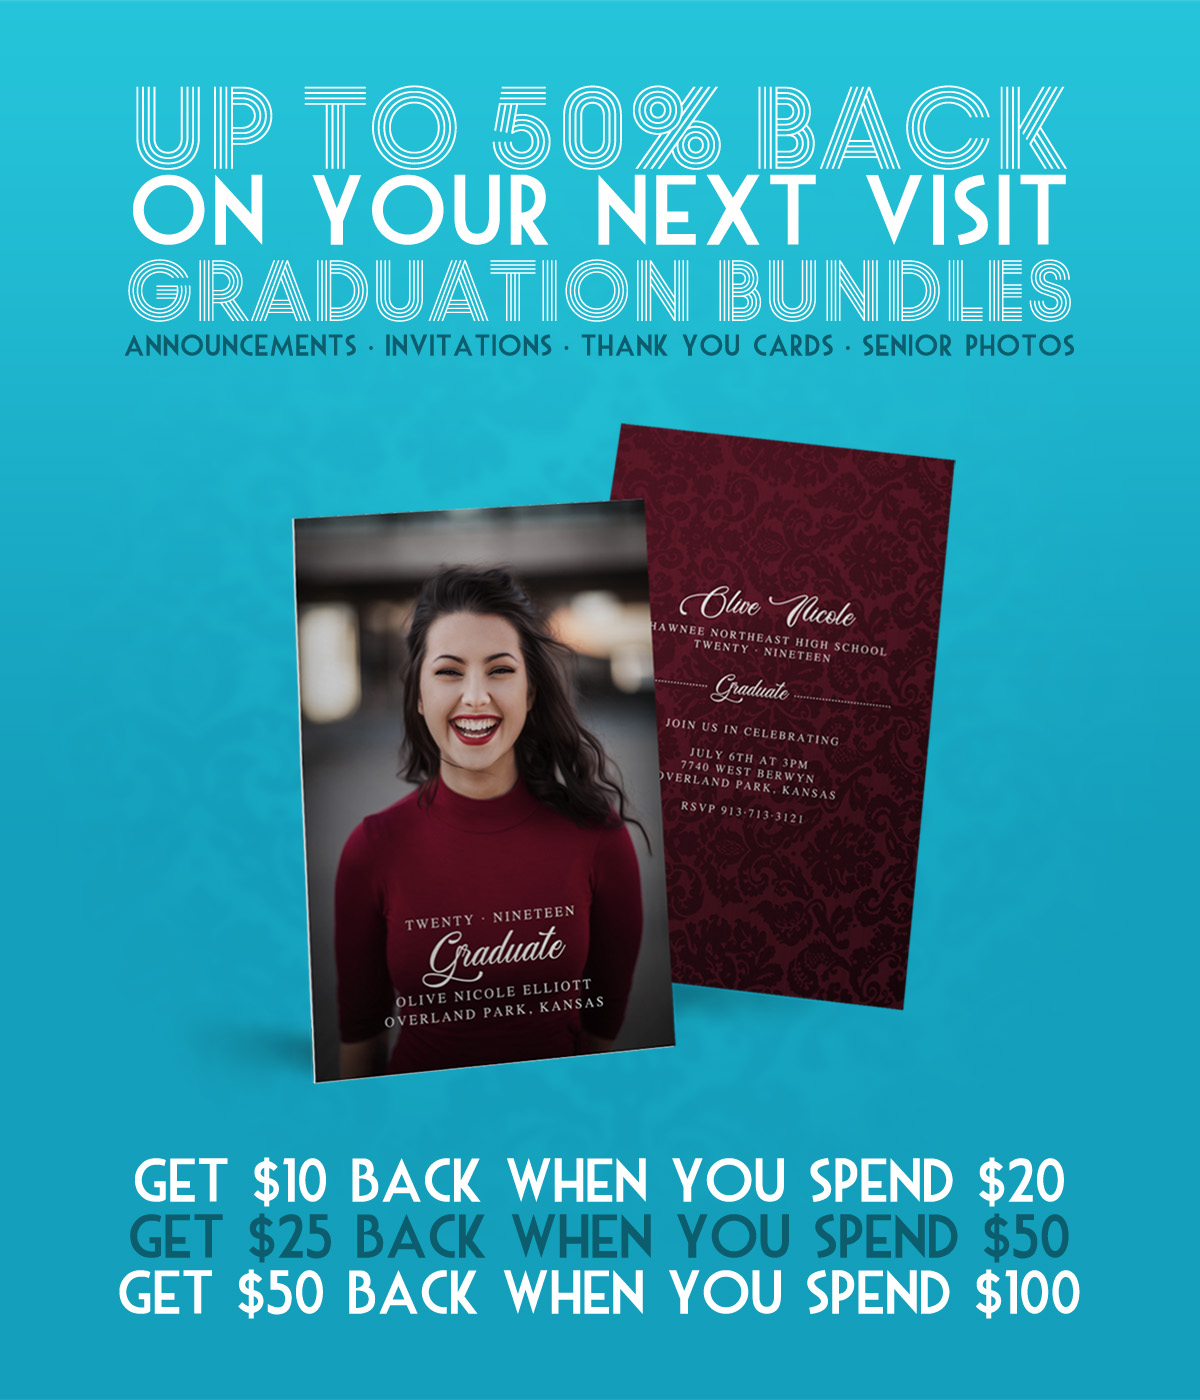 **ASK ABOUT GRADUATION BUNDLES: When you order any combination of Graduation Announcements, Party Invitations, Thank You Cards, and Senior Photos and receive up to 50% back on your next visit! Spend $20, get $10 back, spend $50, get $25 back, spend $100 and get $50 back! Graduation prints are available on high-quality photo paper, canvas, aluminum, wood, or foam board mounted.